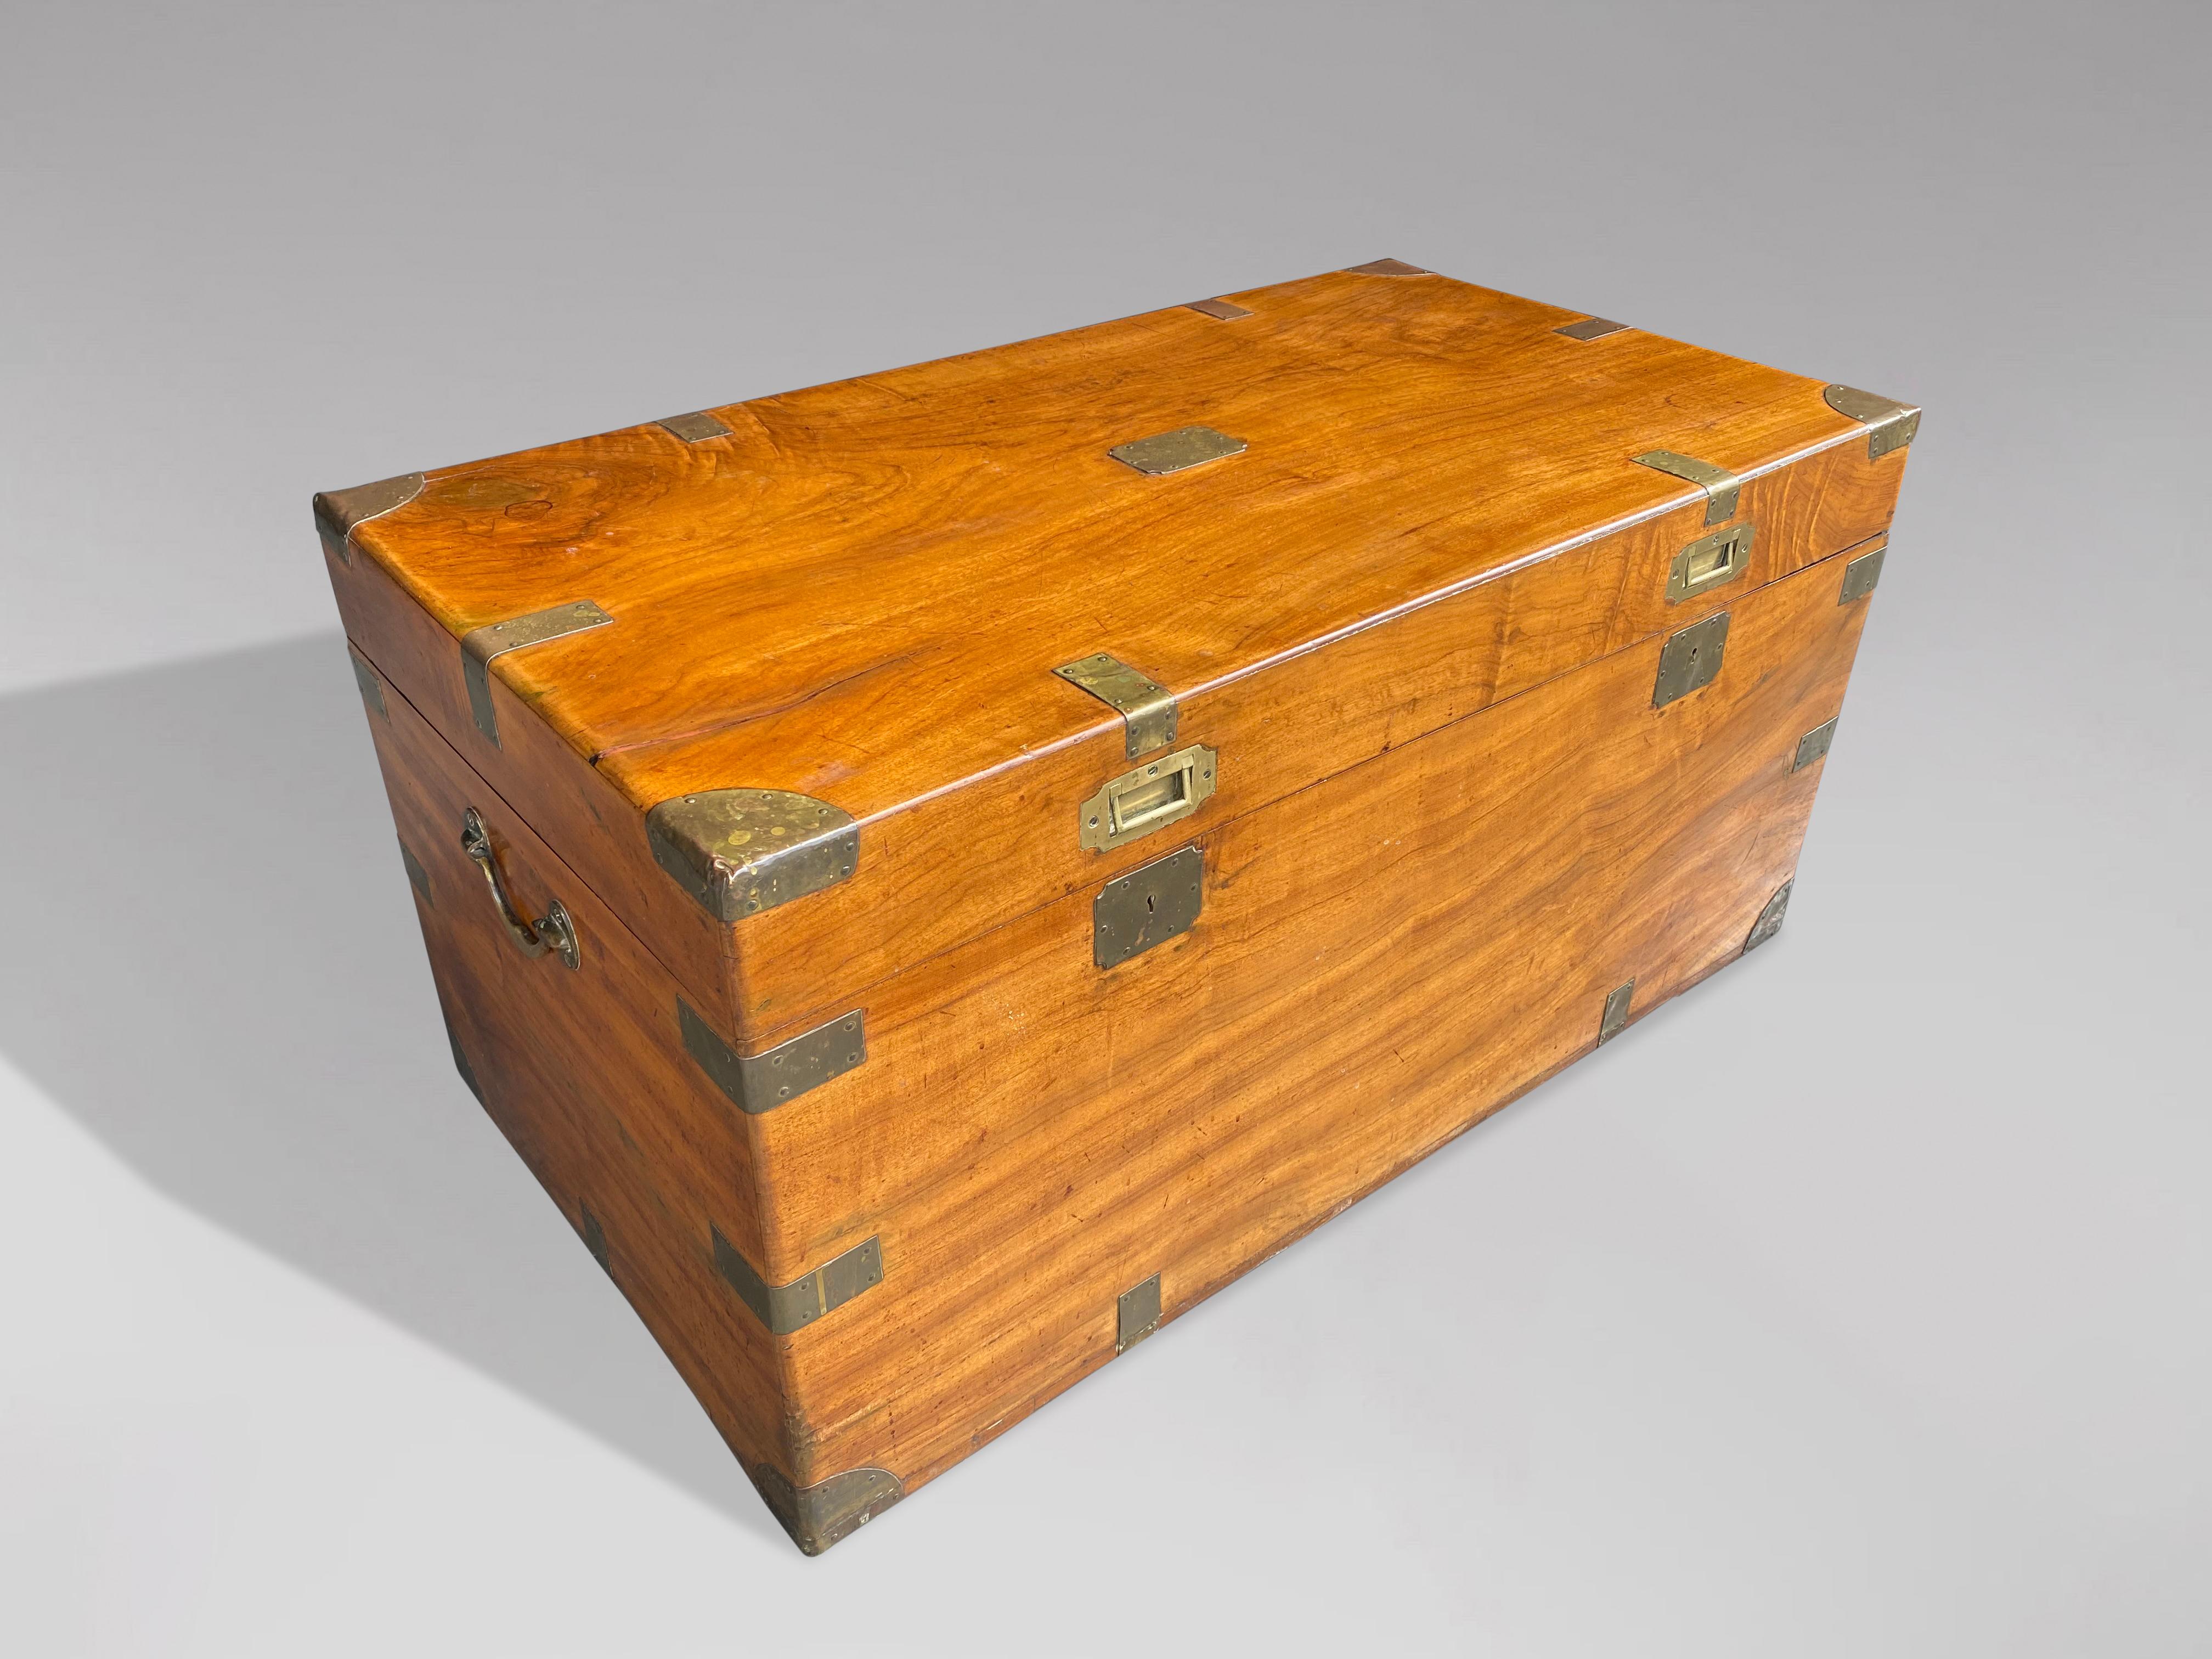 A large late 19th century camphor wood brass bound travelling chest or trunk with brass mounts and brass carrying handles. Two locks. Warm rich colour and patina. Very clean and in mint condition.

The dimensions are:
Height: 49cm